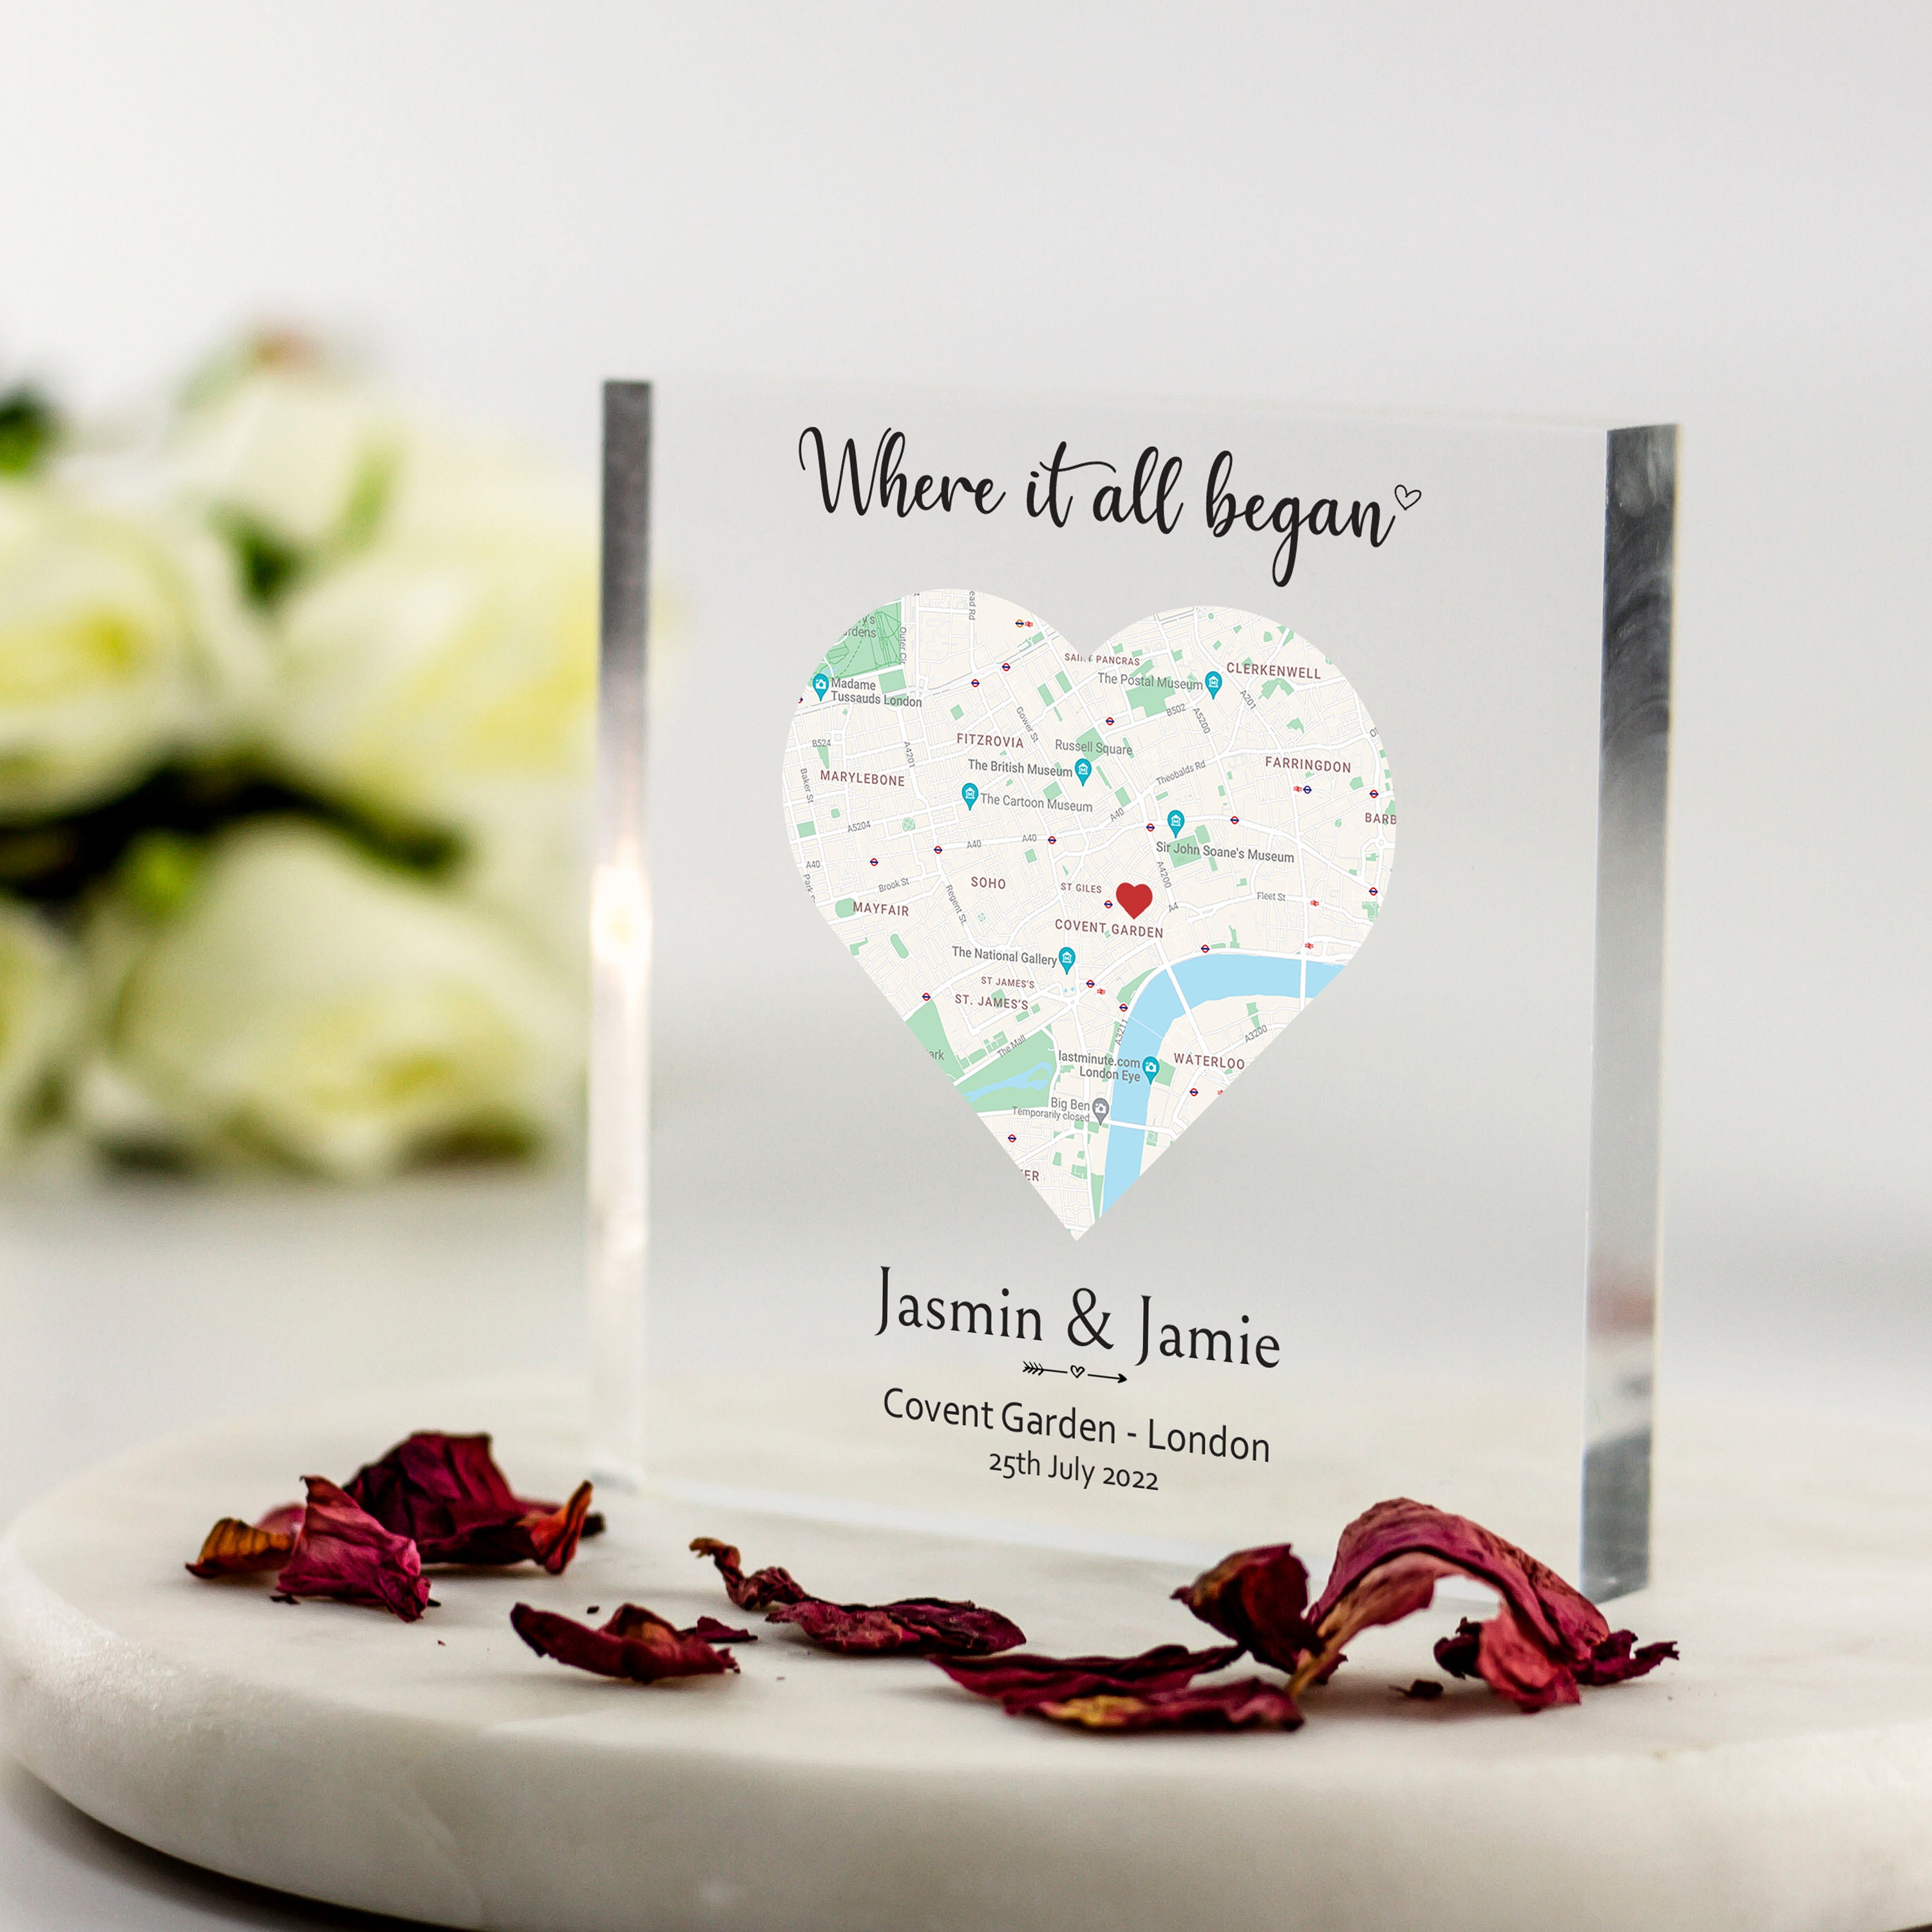 Personalized Our First Date Map Acrylic Plaque, Custom Map Plaque